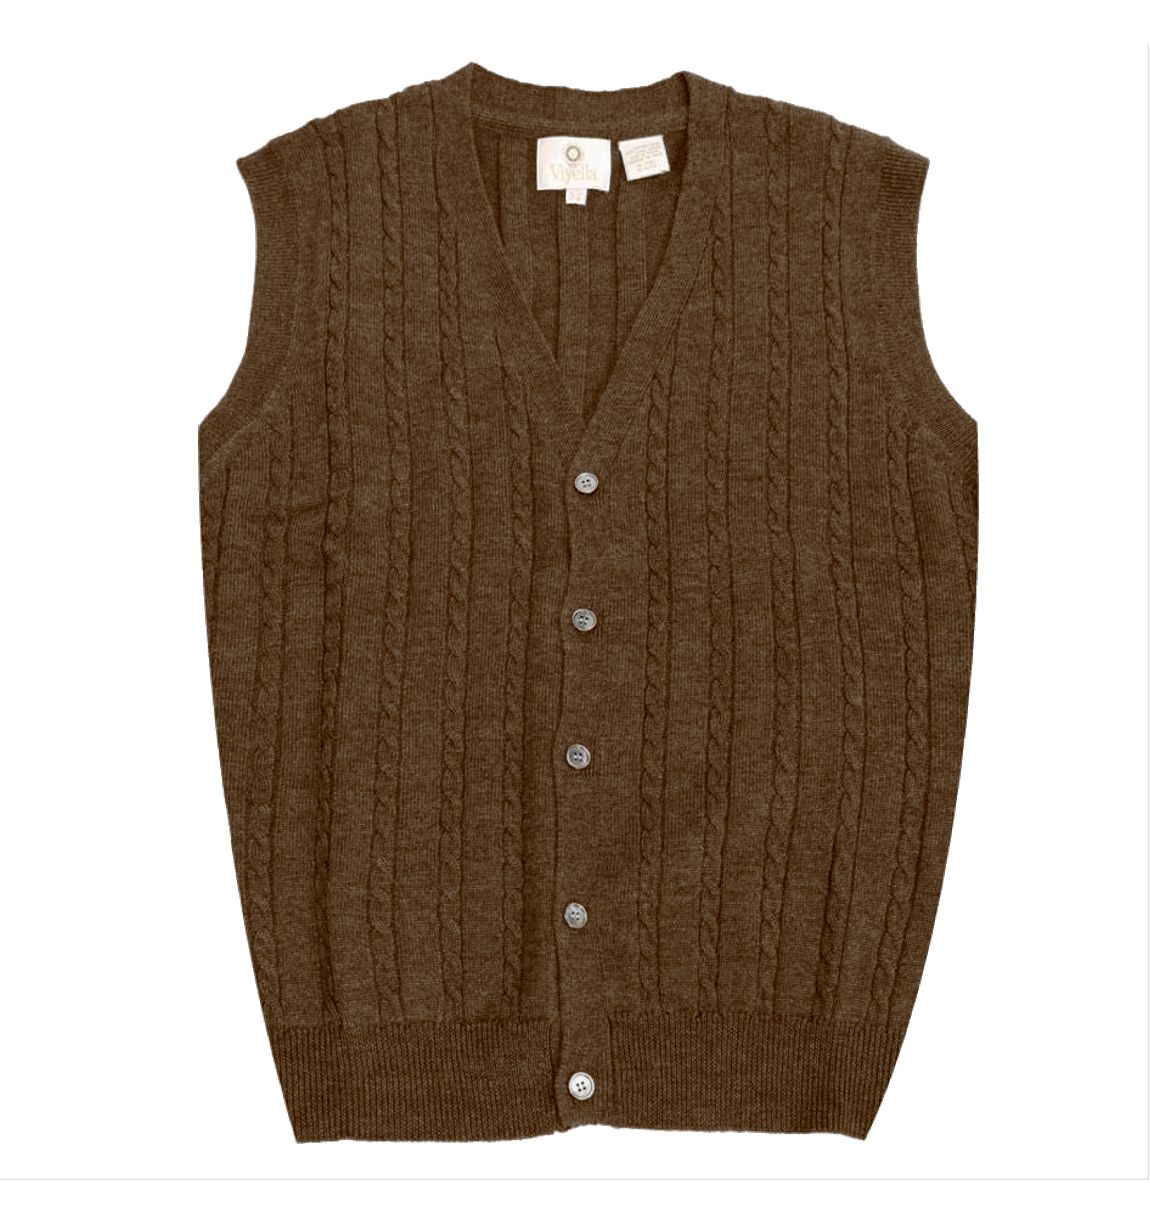 Extra Fine 'Zegna Baruffa' Merino Wool Button-Front Cable Knit Sleeveless Sweater Vest in Brown Melange by Viyella